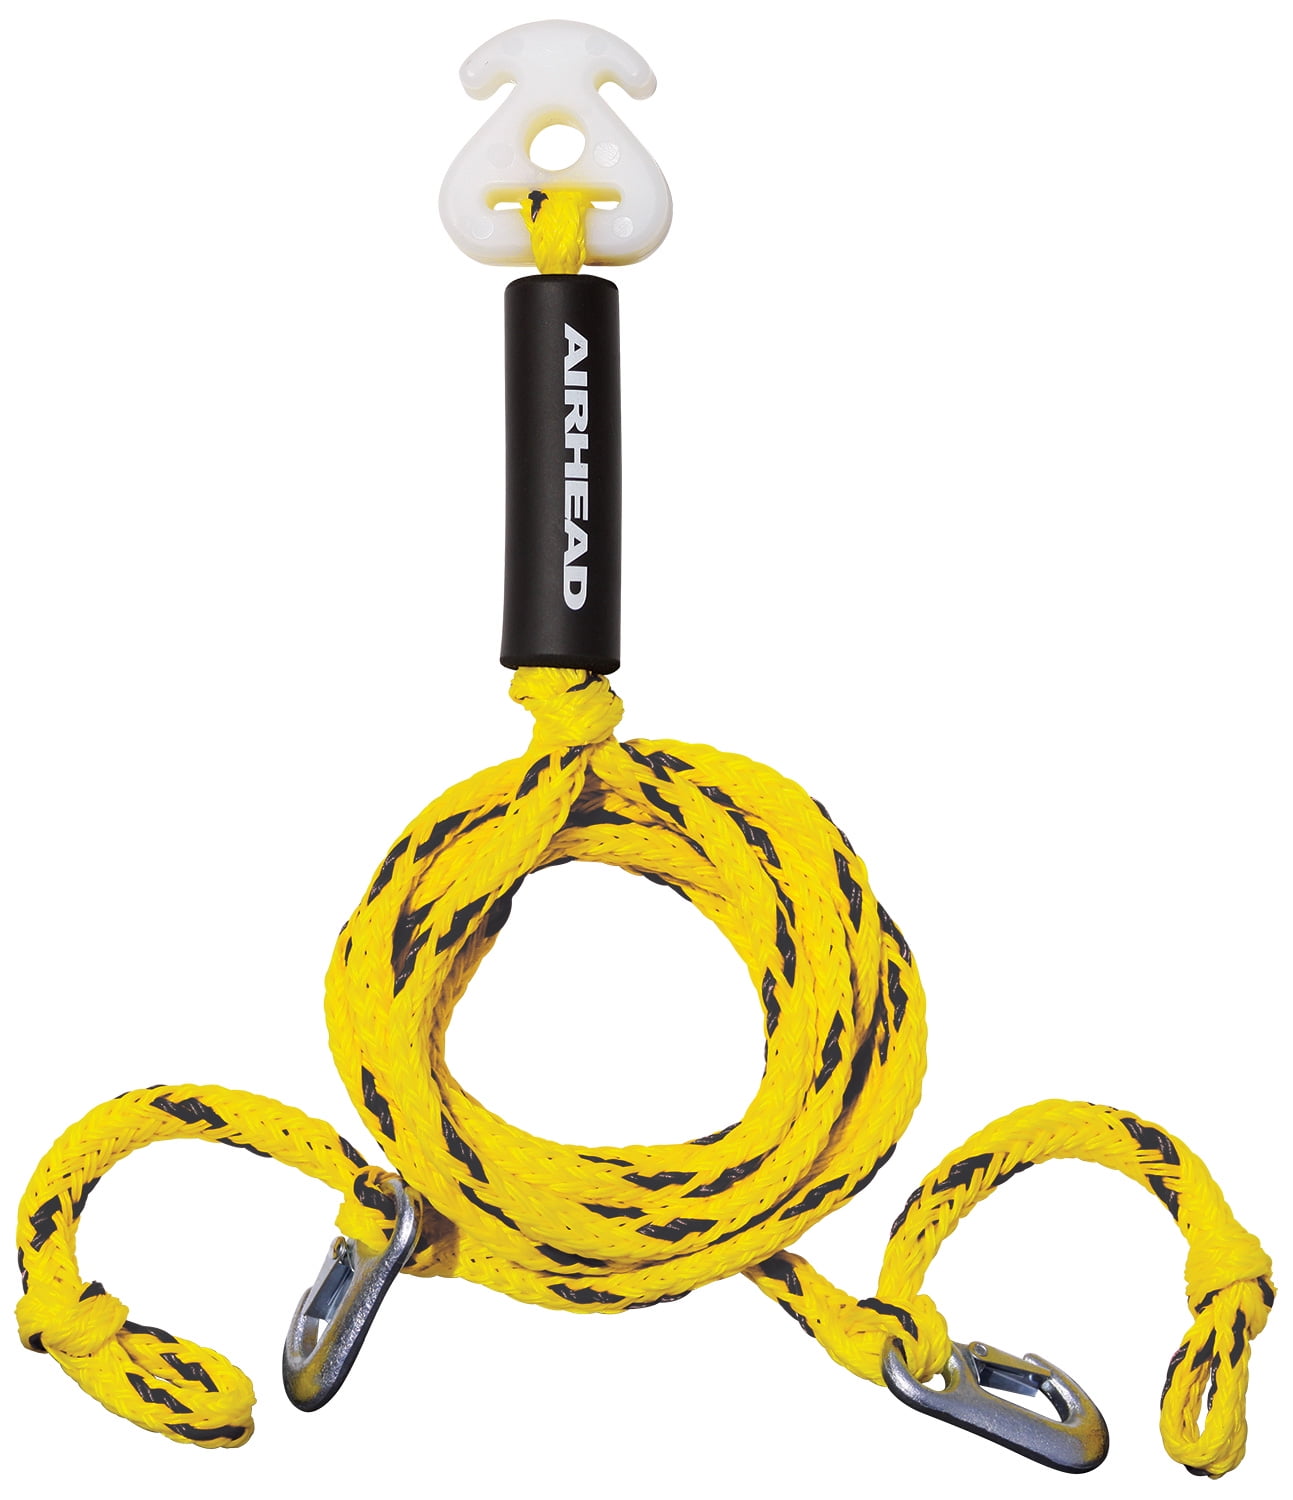 Details about   Seachoice 86761 Tow Harness with Float 12 Foot Rope for Pulling Skier Boar... 